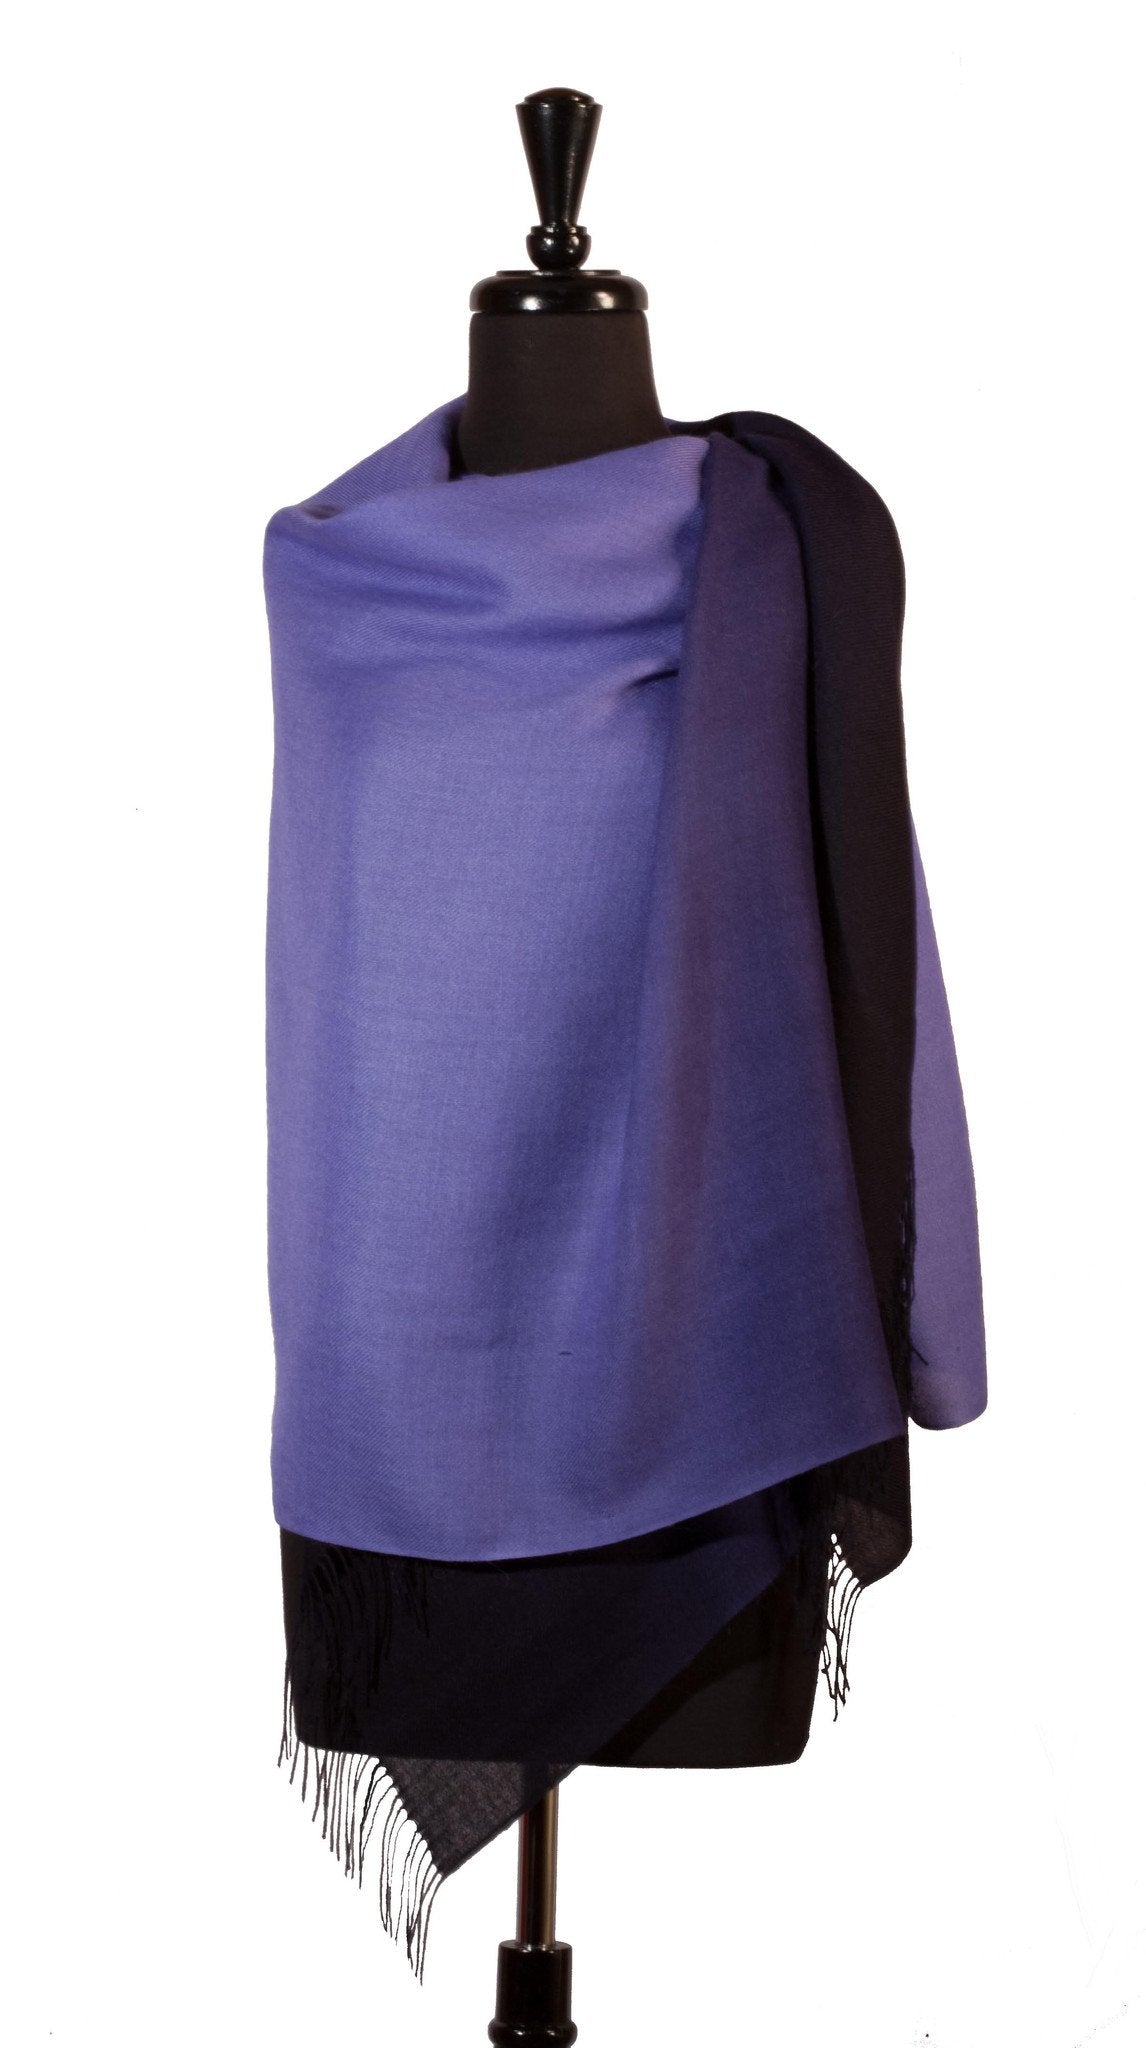 Baby Alpaca & Silk Shawl Two-toned Degrade - Dip Dyed in Periwinkle Blue - Qinti - The Peruvian Shop